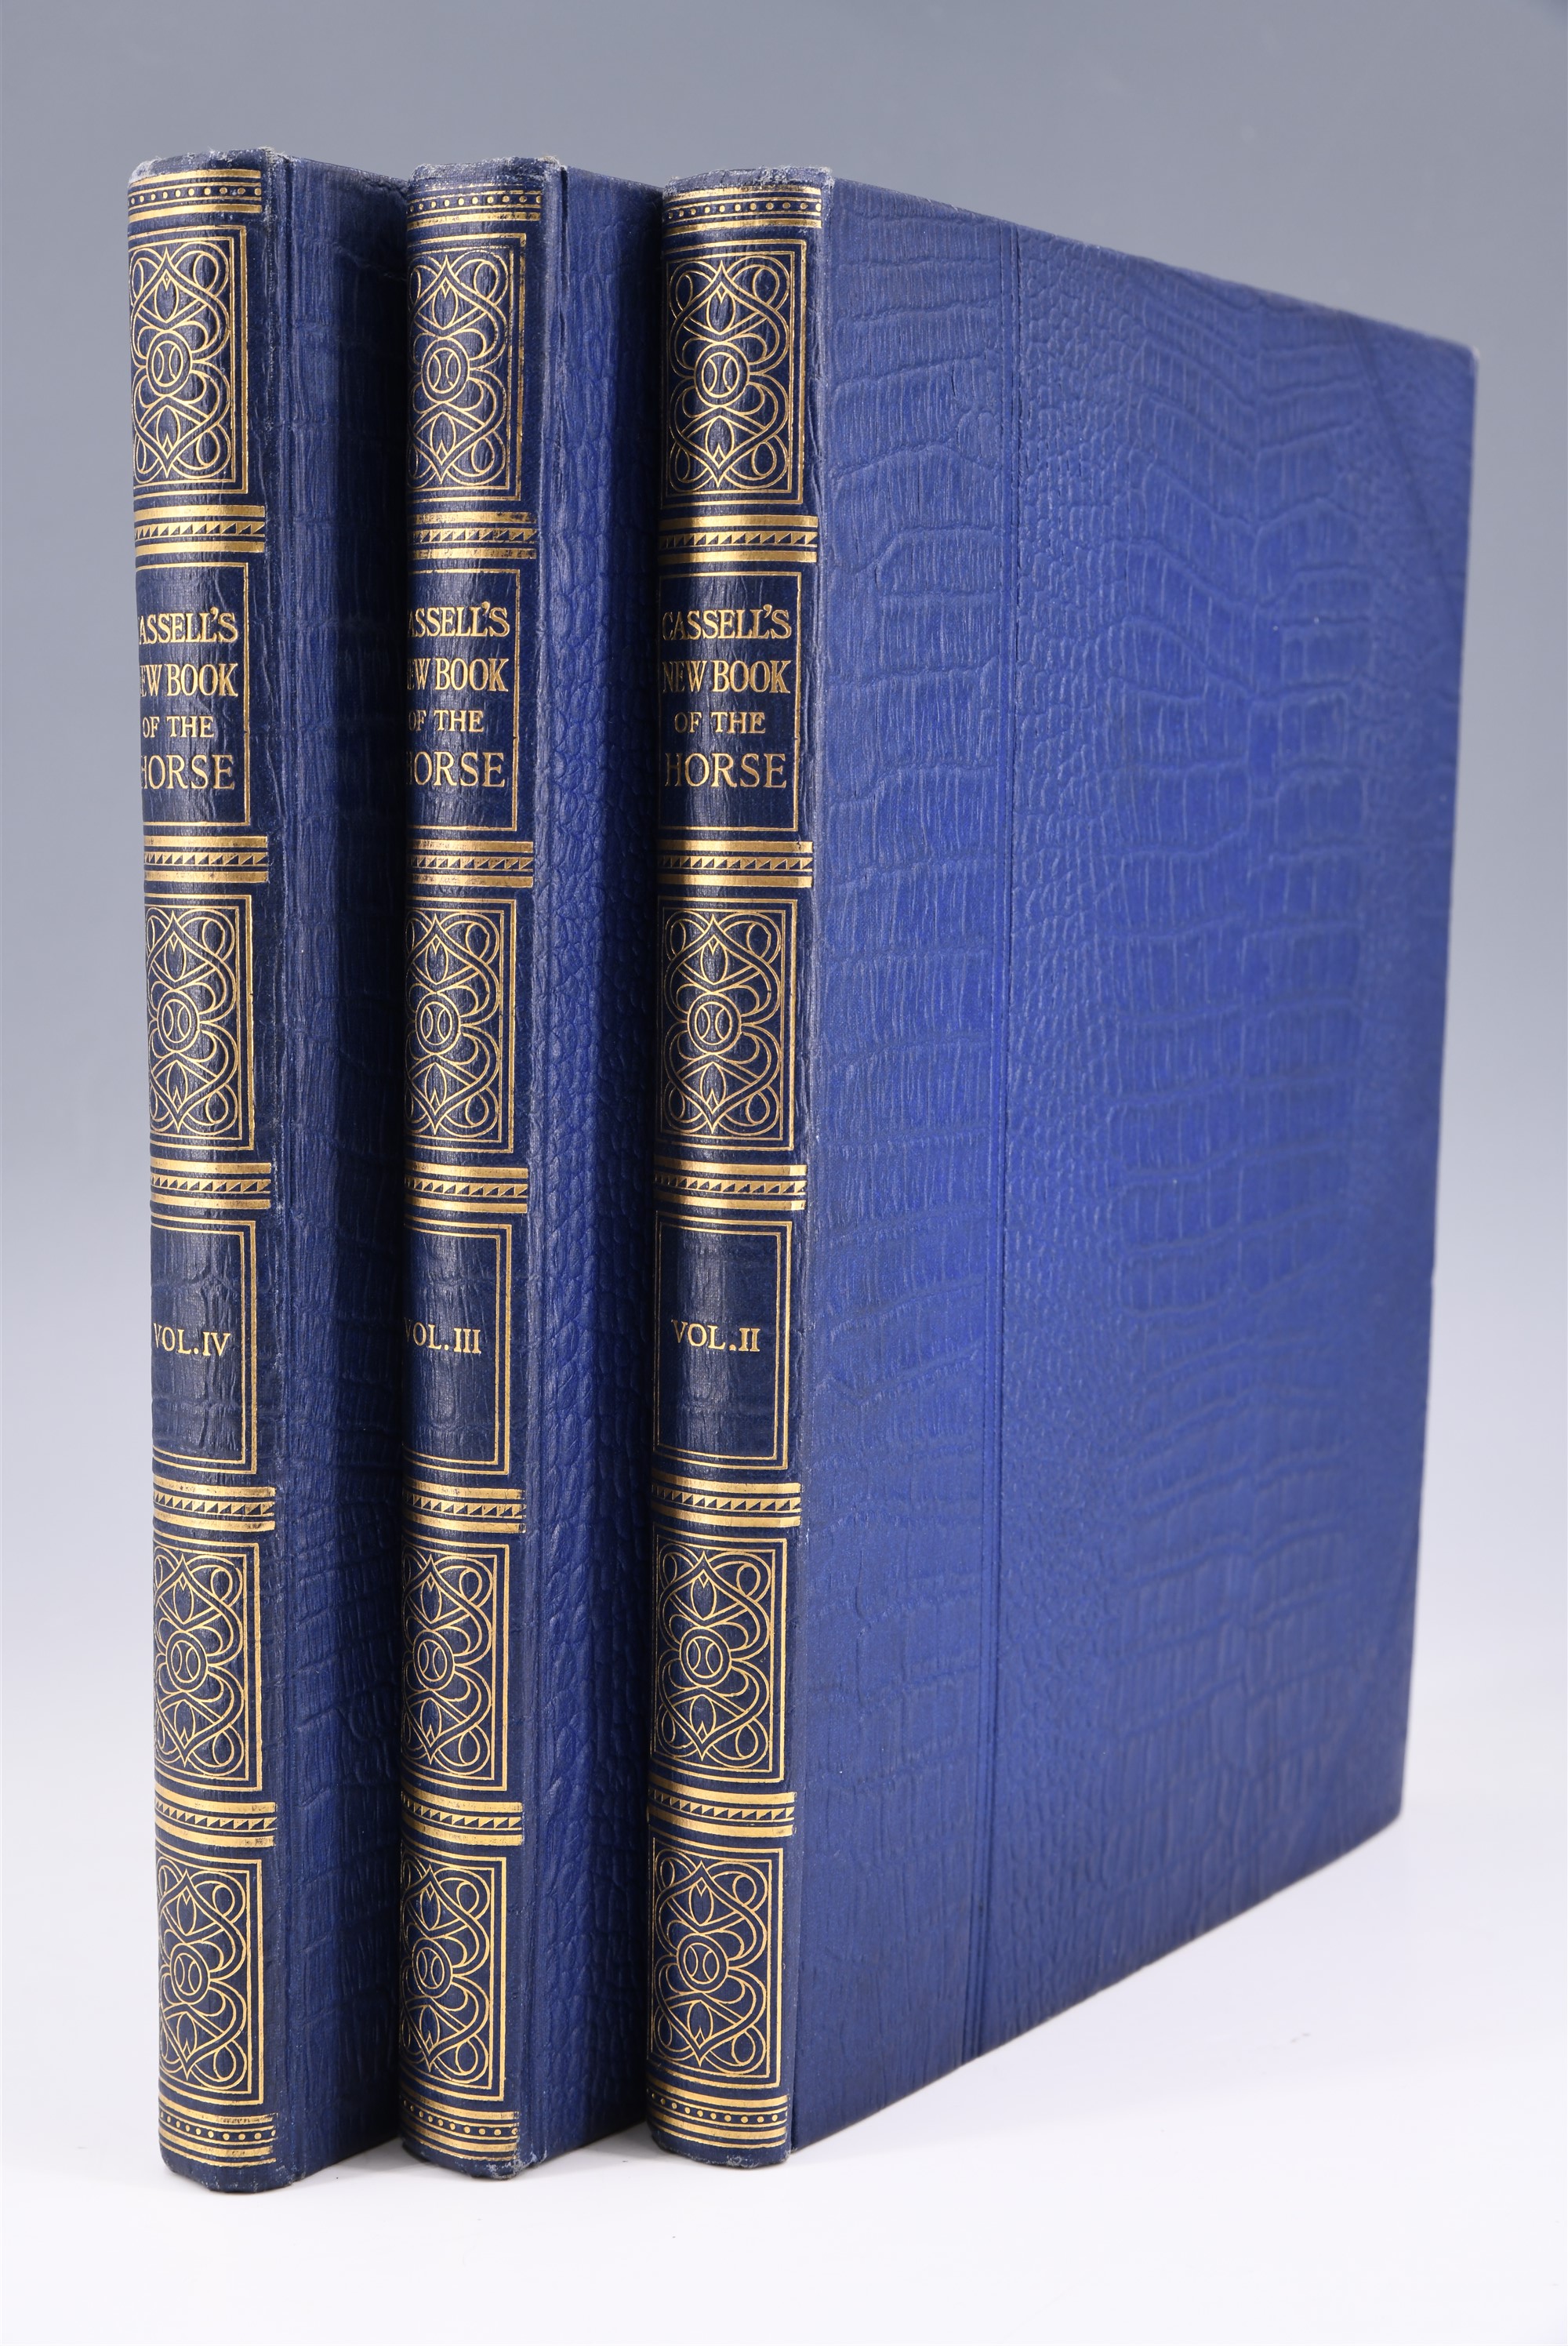 Charles Richardson, "Cassell's New Book of the Horse", three volumes, London, The Waverley Book Co - Image 2 of 2